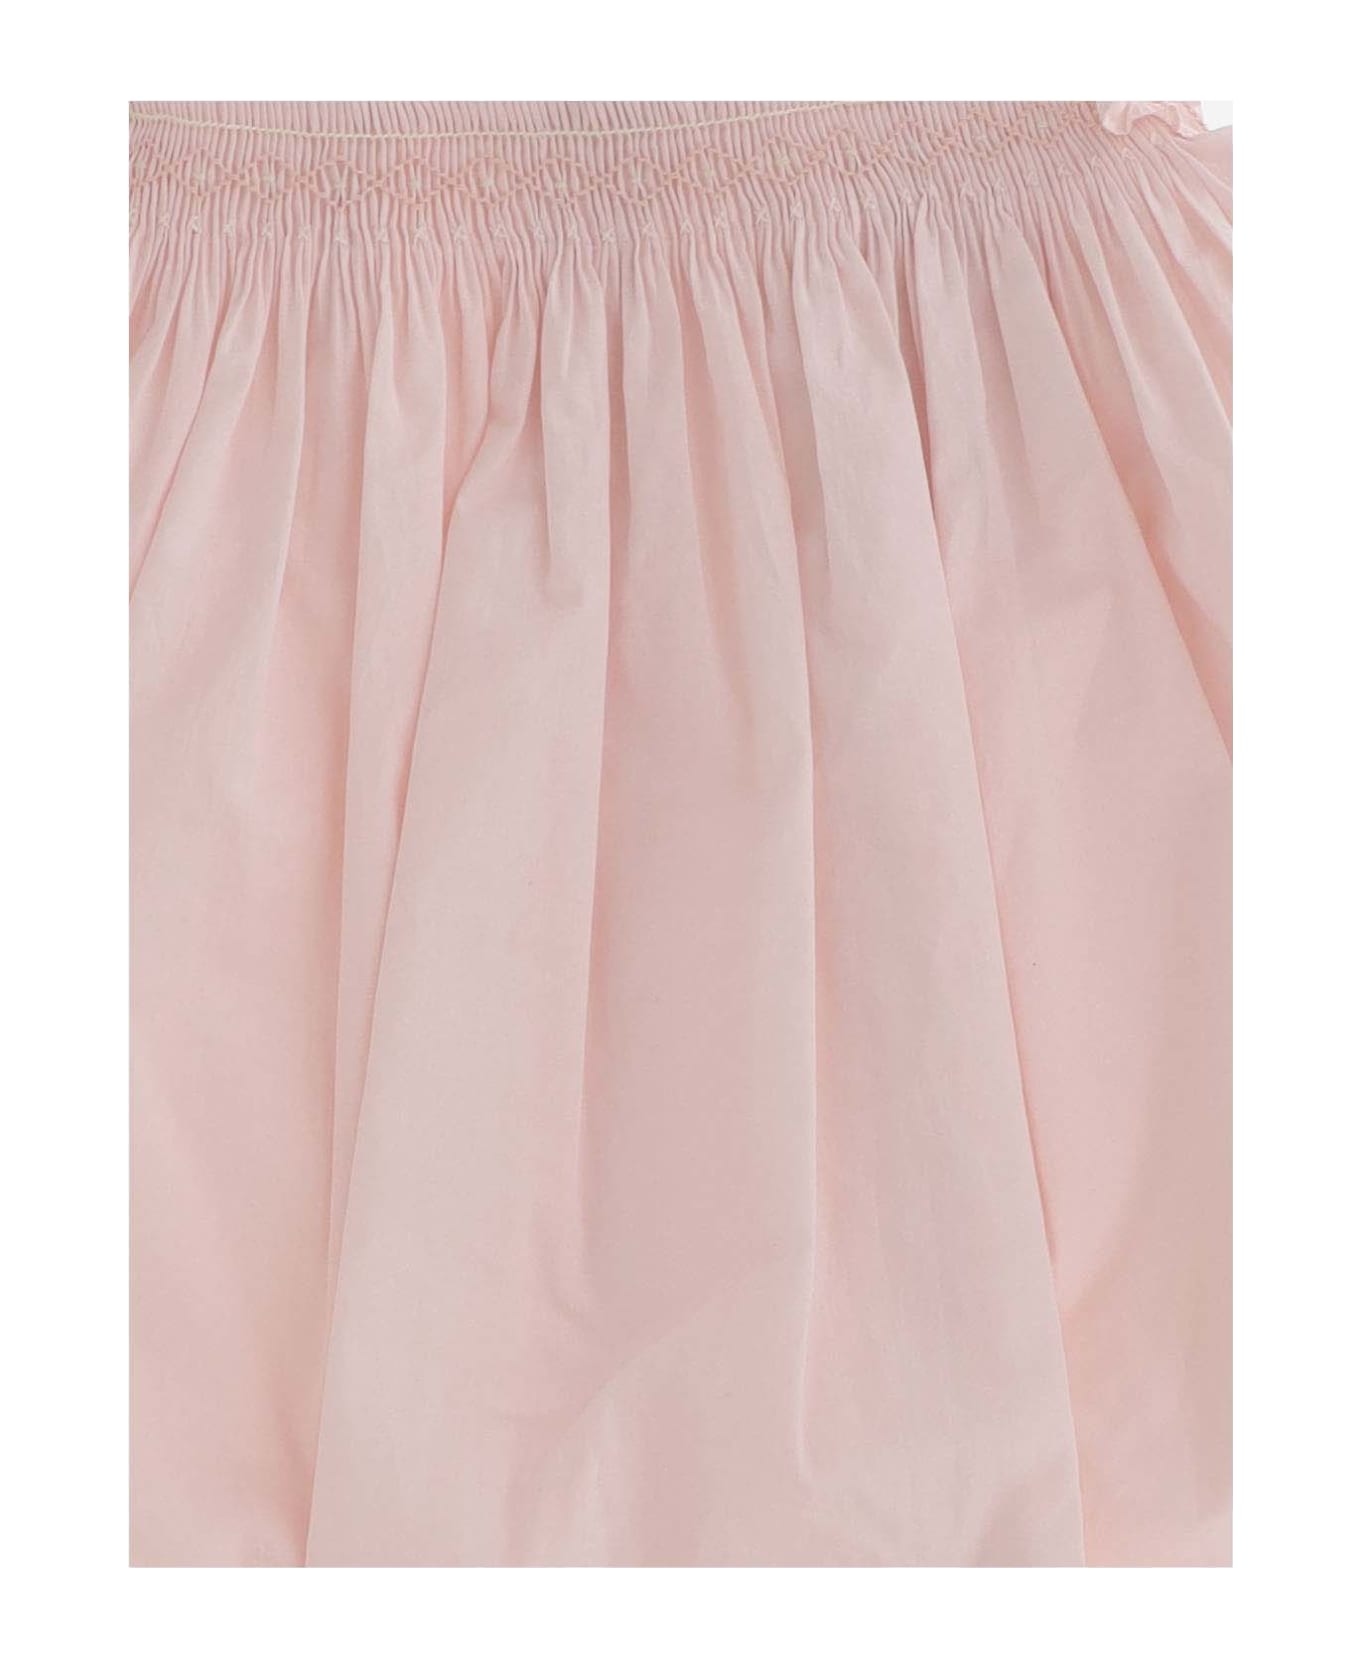 Bonpoint Cotton Dress With Smock Stitch Embroidery - Pink